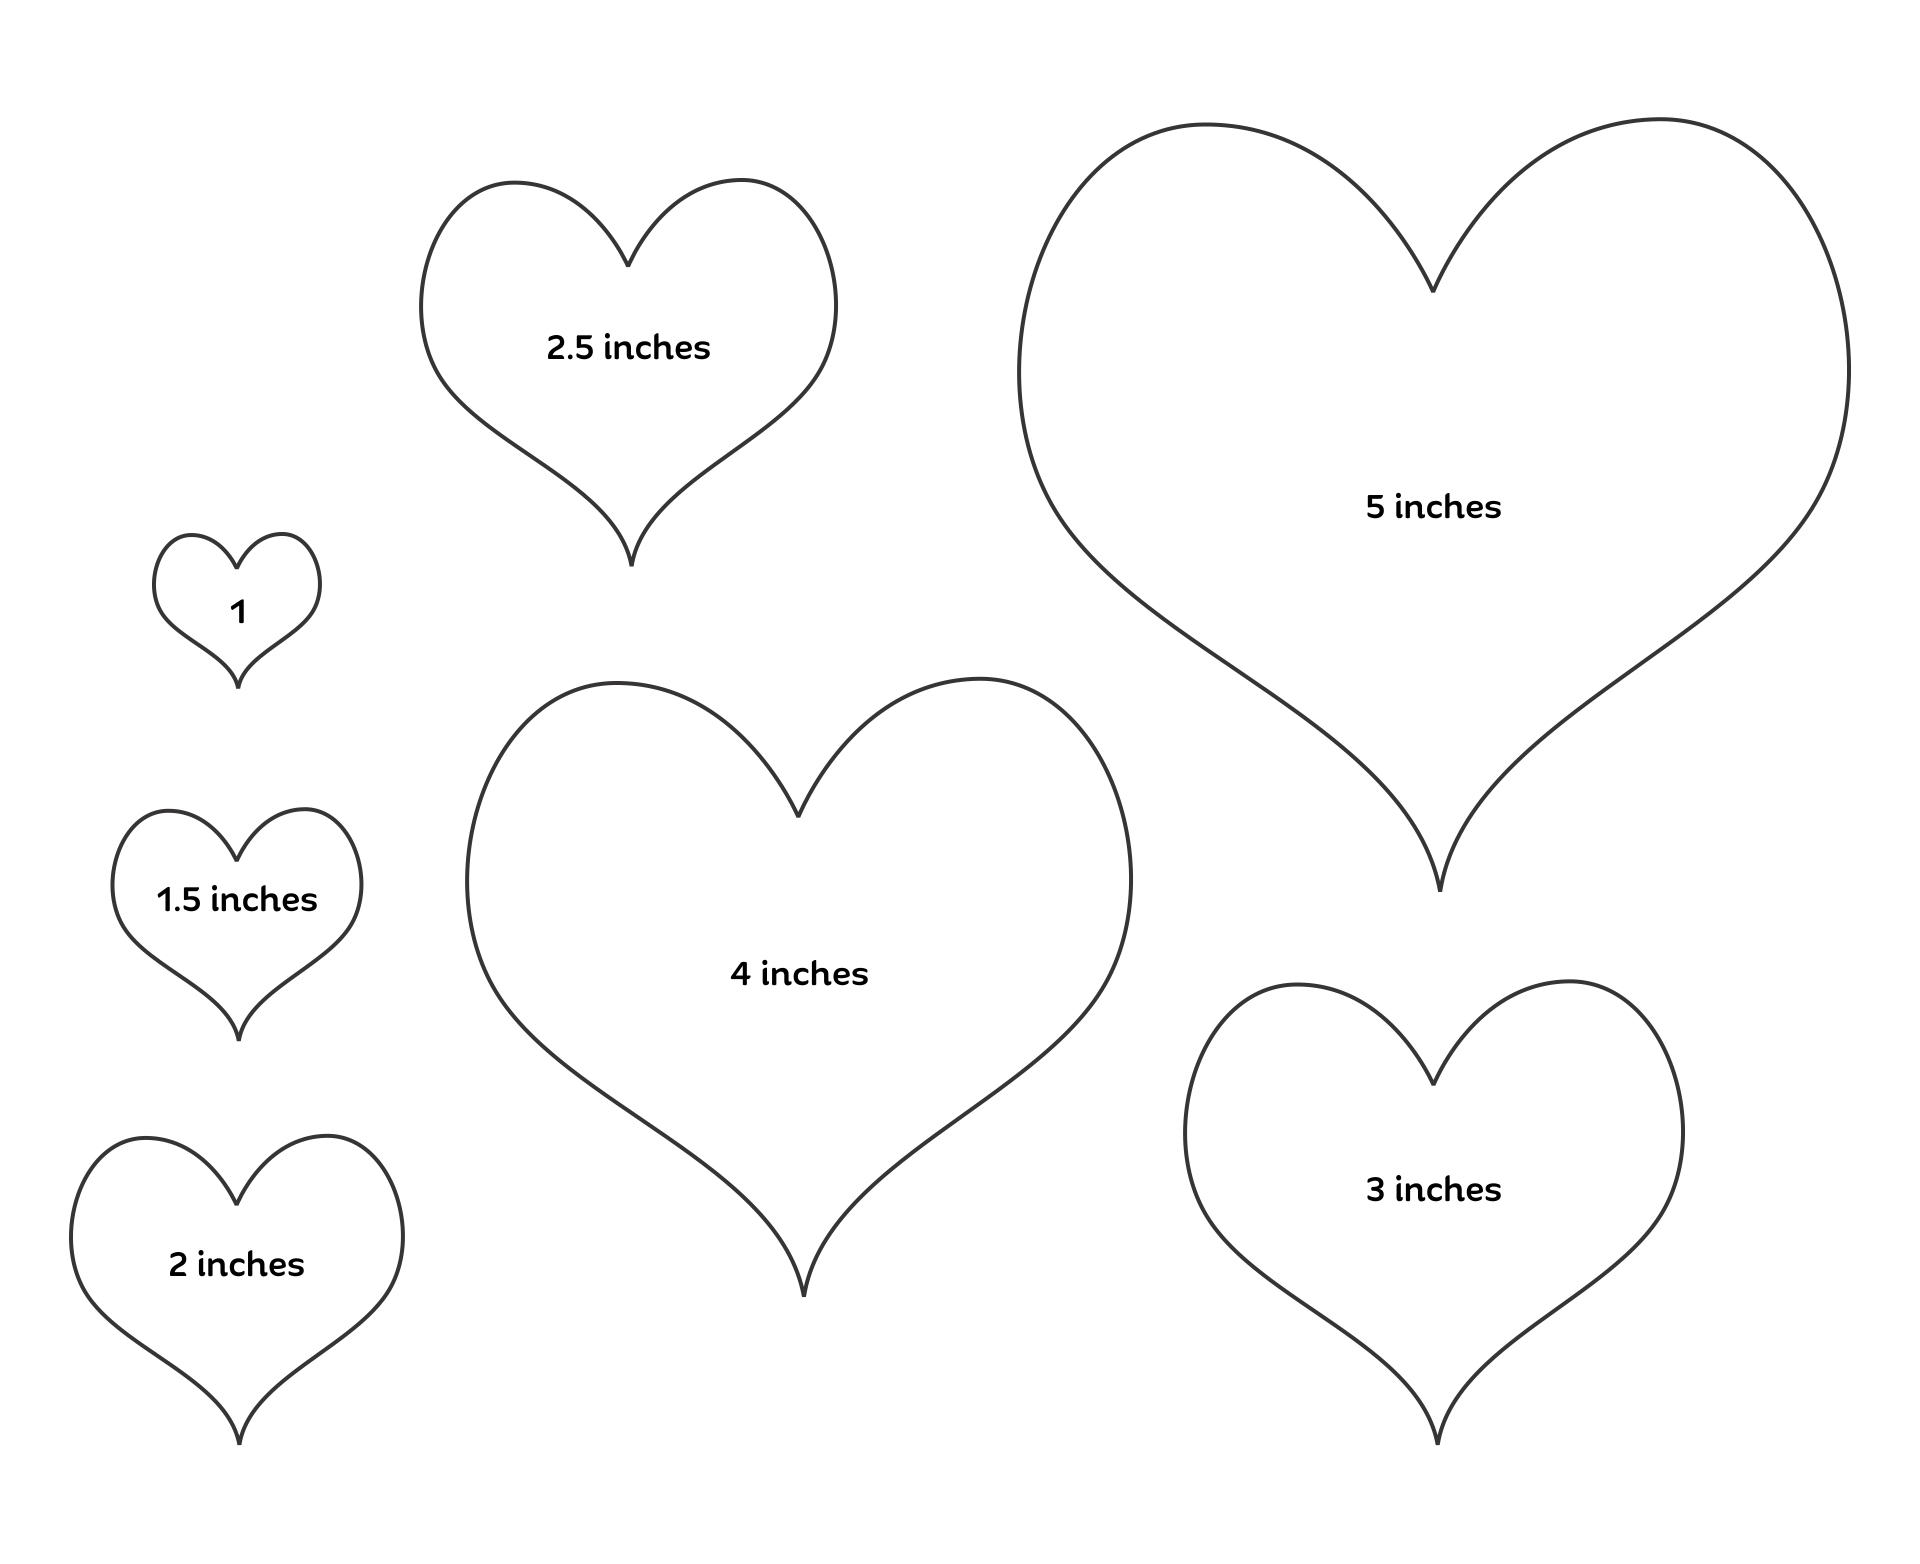 printable-5-inch-heart-template-heart-template-5-inch-tim-s-printables-heart-template-heart